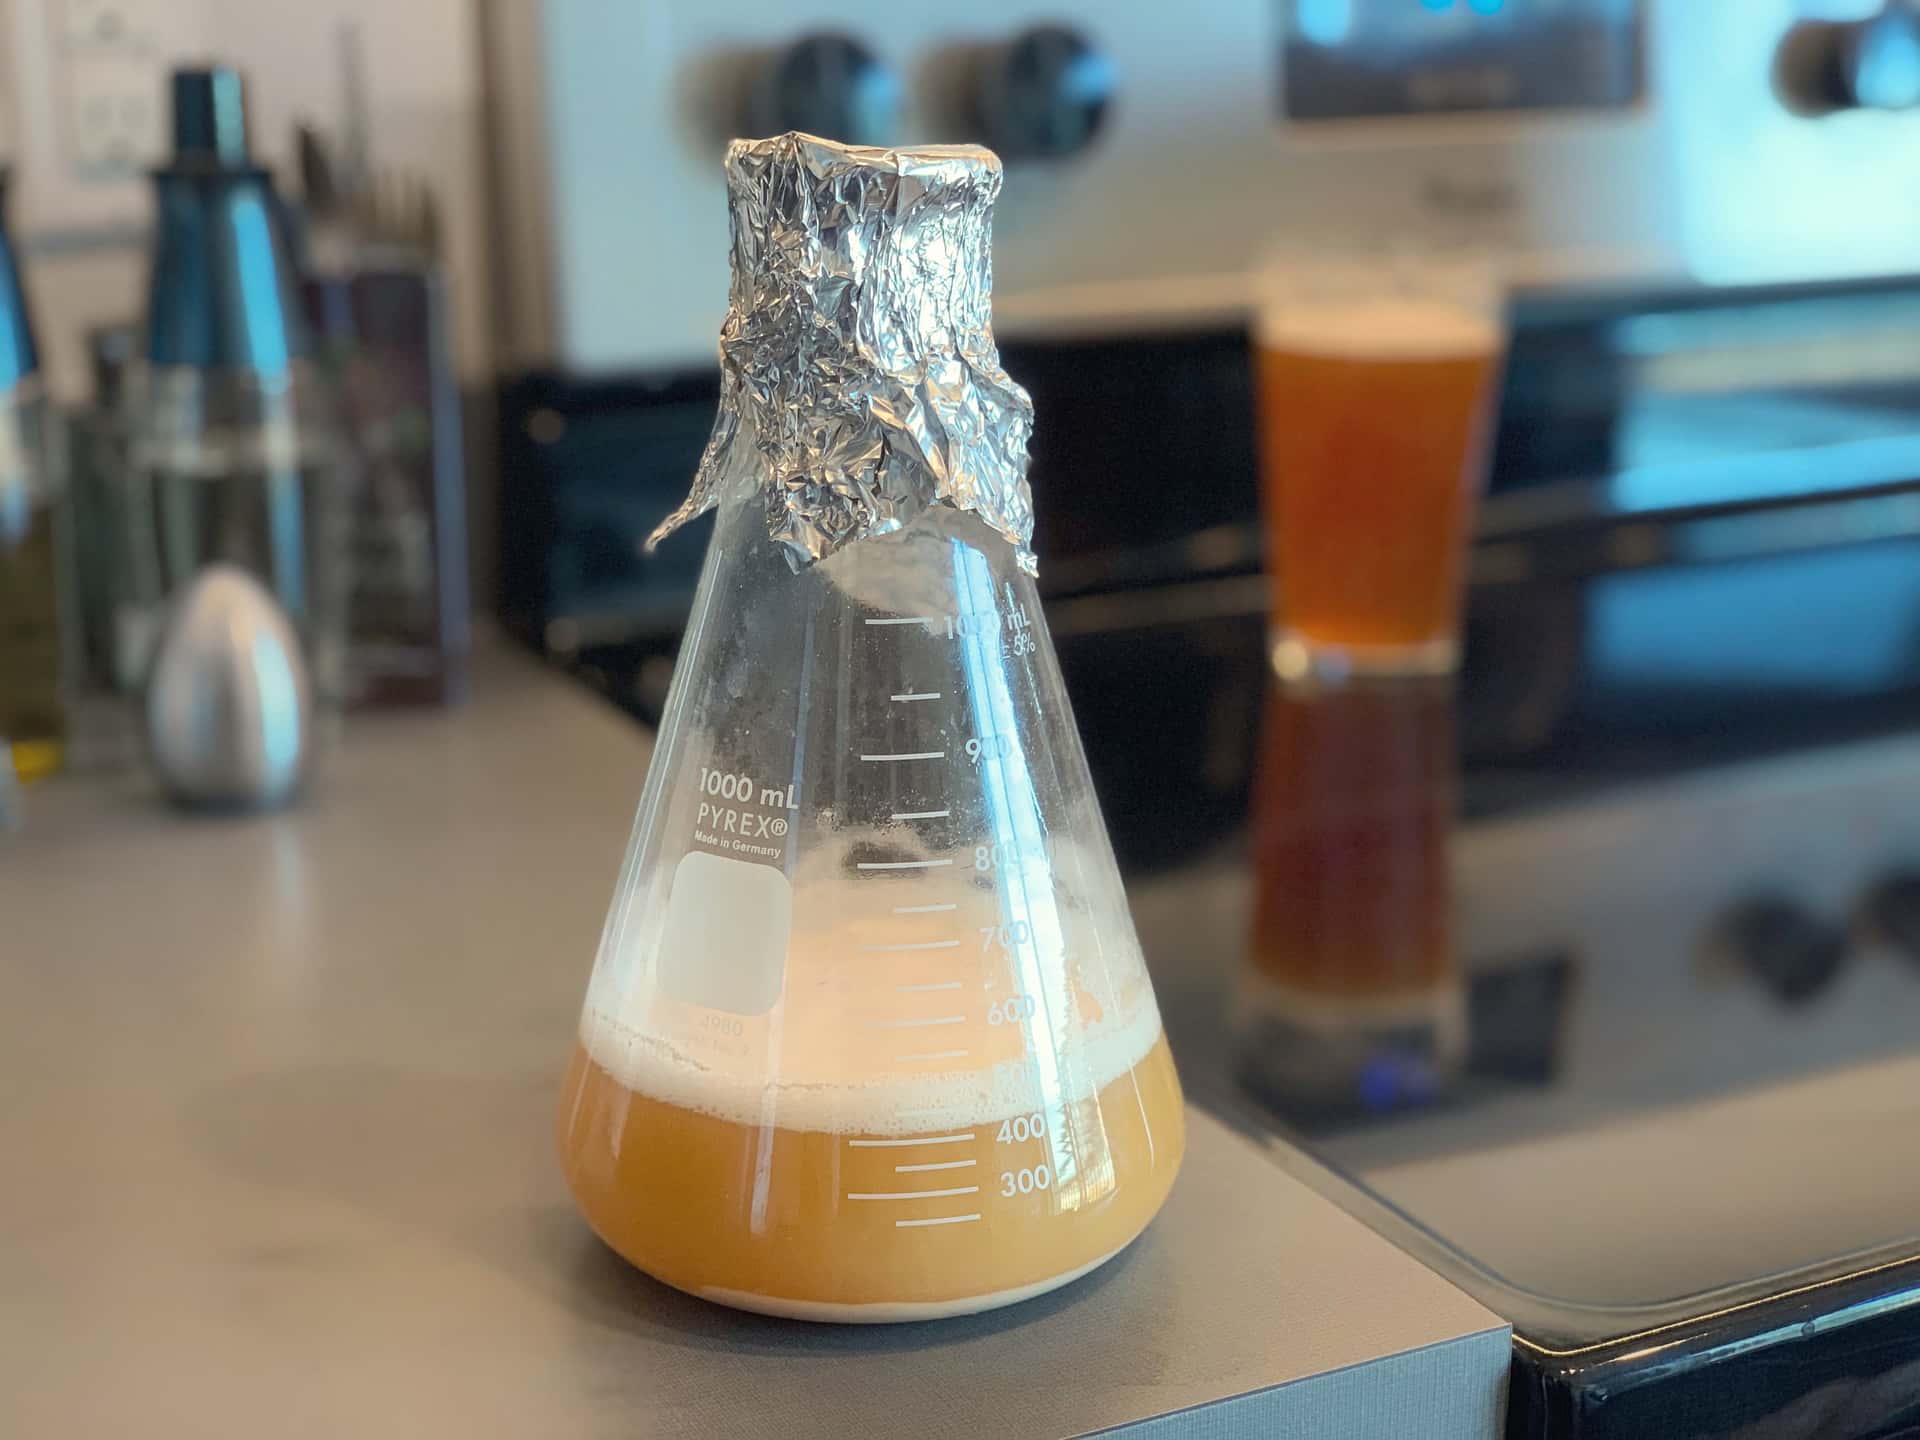 yeast starter of Imperial Yeast’s A38 “Juice” strain in a 1-L Erlenmeyer flask